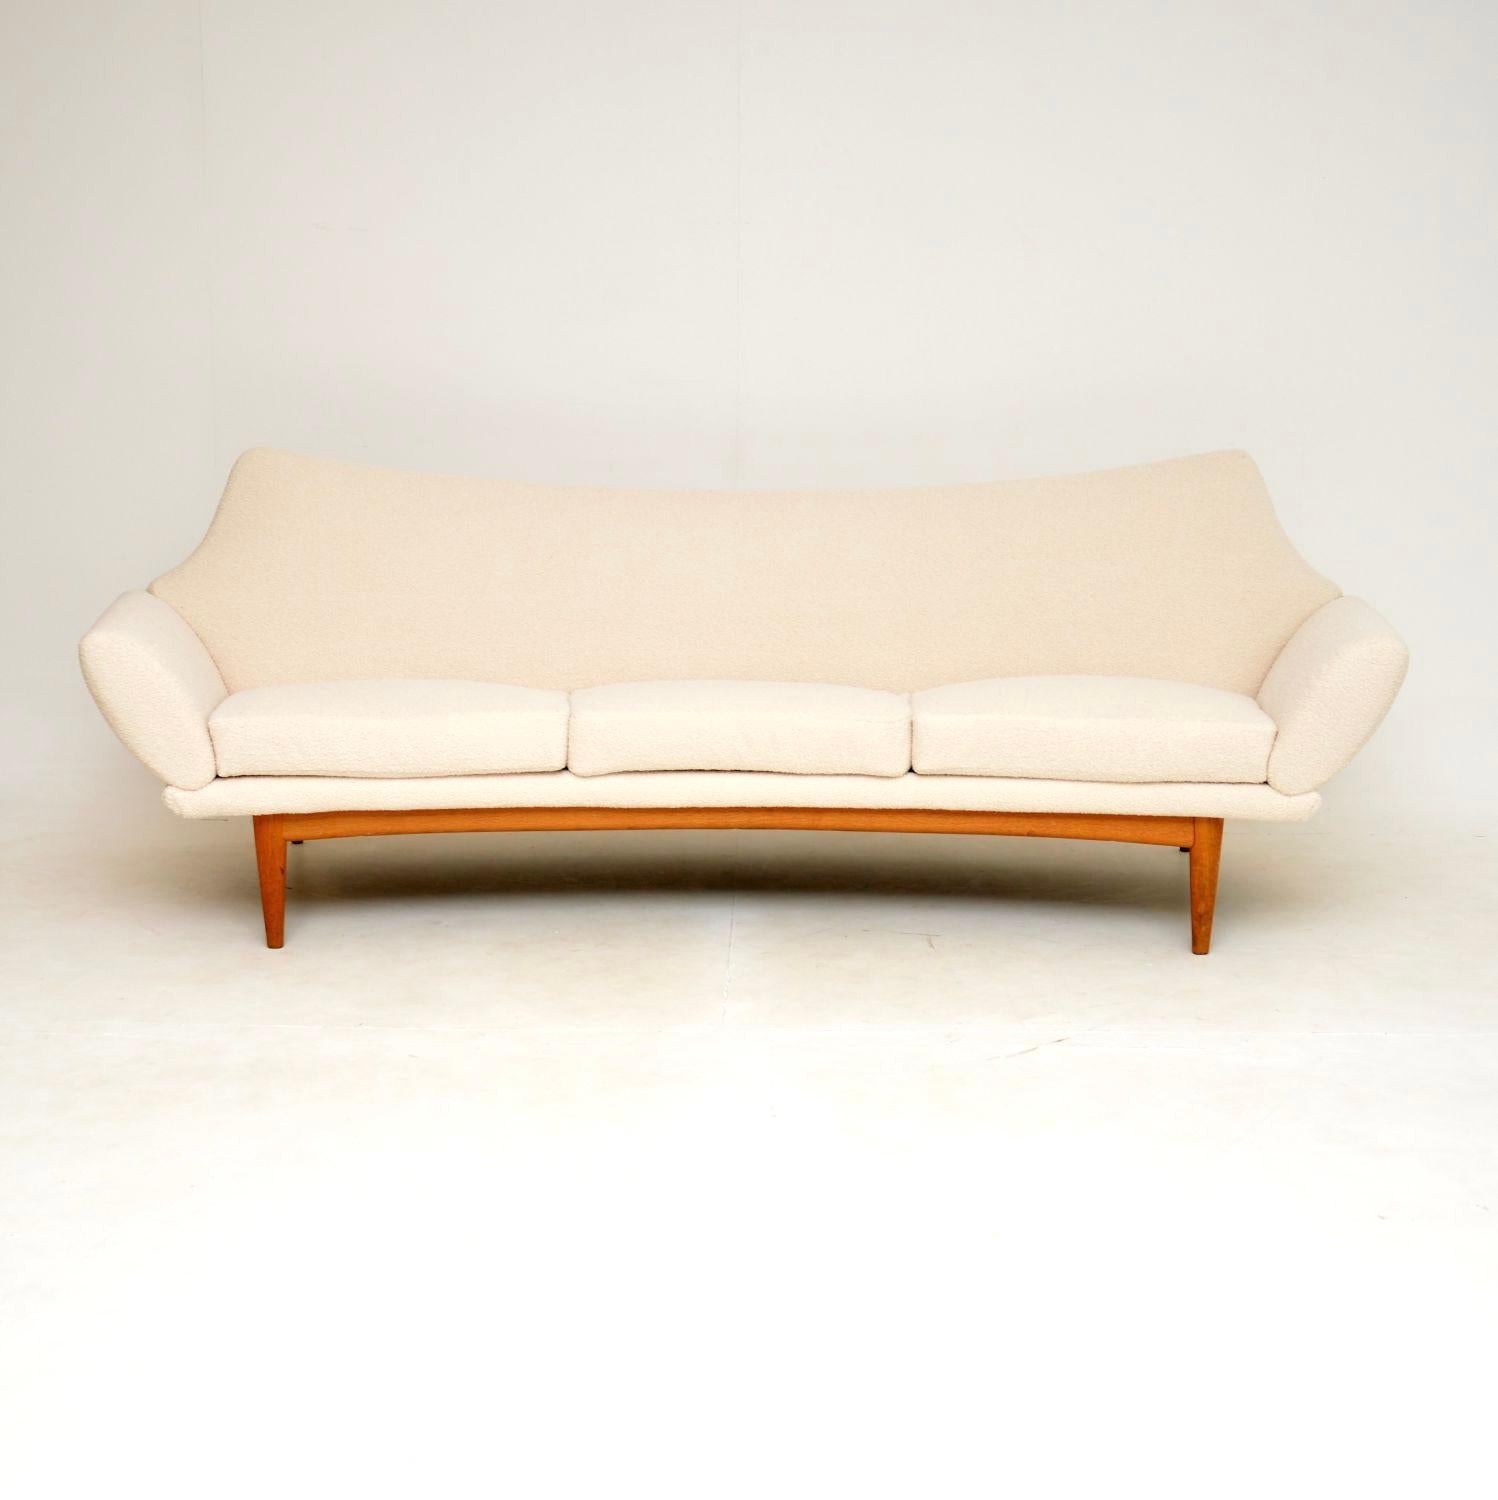 An absolutely stunning vintage Danish sofa, designed by Johannes Andersen. This model is called the ‘Hollywood’, it was made in Denmark by Trensums and dates from around the 1960’s.

It is of amazing quality and has an extremely stylish design.